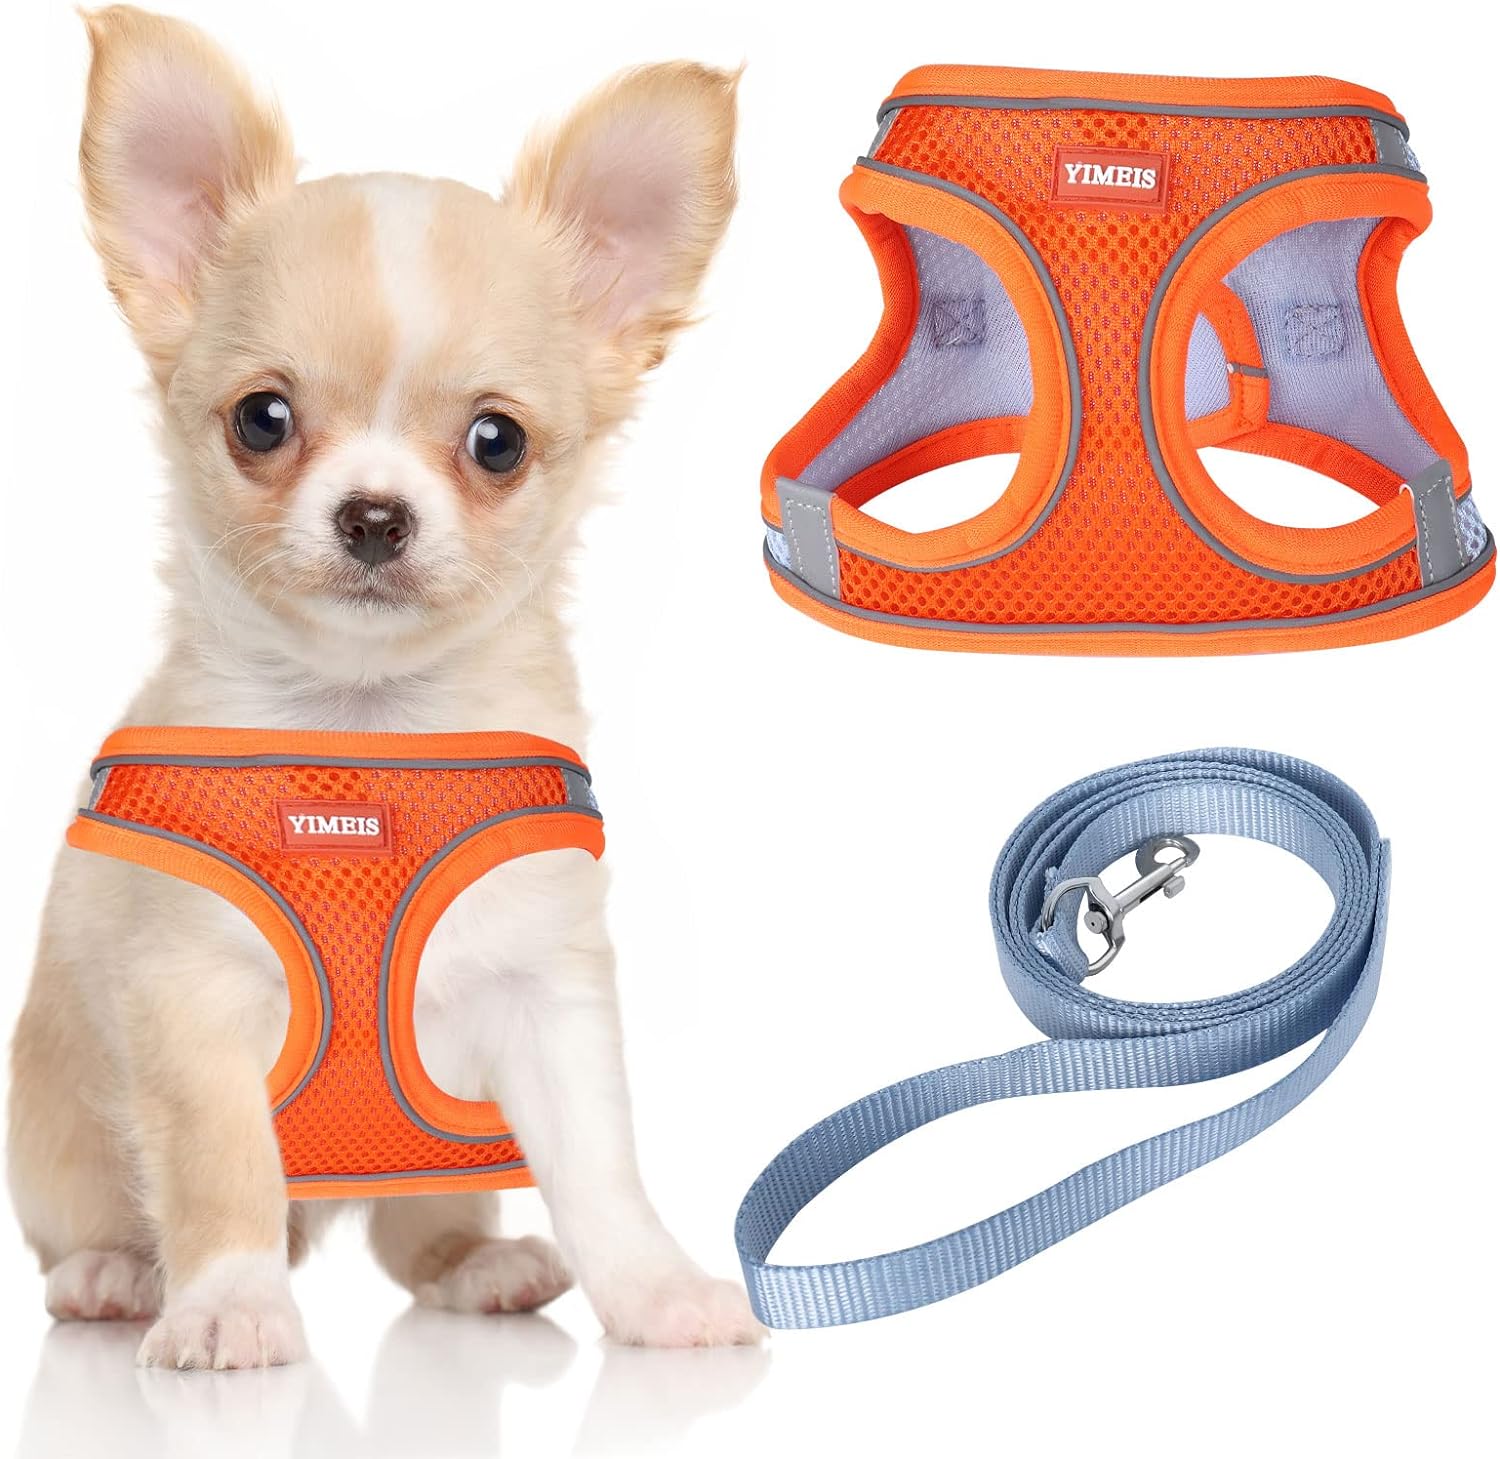 YIMEIS Dog Harness and Leash Set, No Pull Soft Mesh Pet Harness, Reflective Adjustable Puppy Vest for Small Medium Large Dogs, Cats (Orangeblue, Small (Pack of 1)